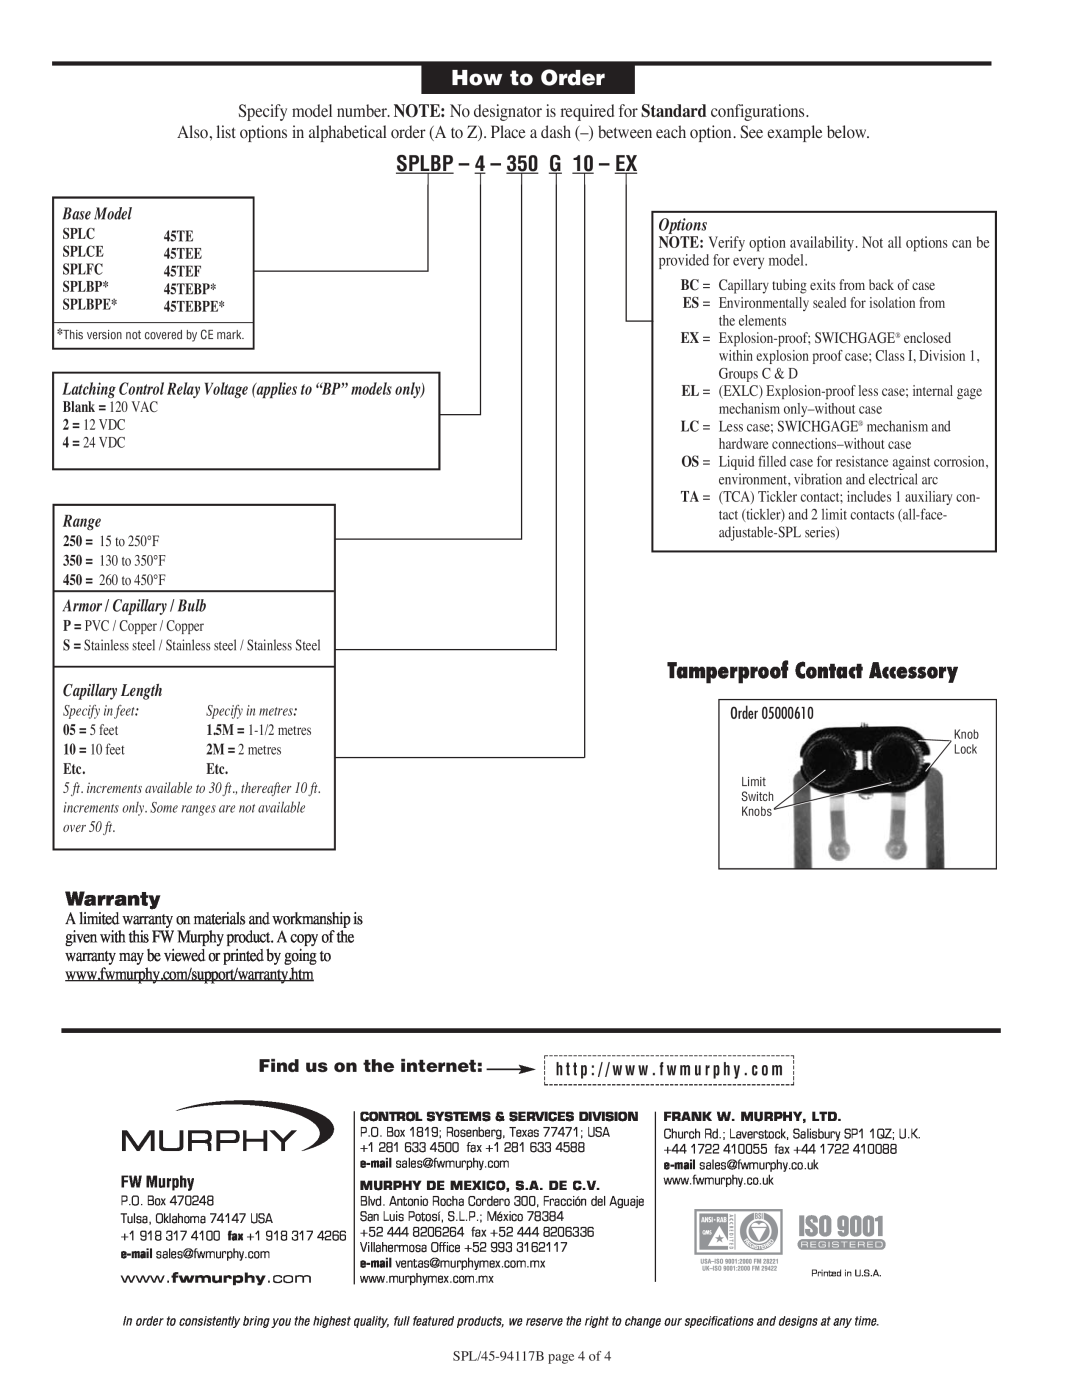 Murphy specifications How to Order, SPLBP - 4 - 350 G 10 - EX, Tamperproof Contact Accessory, Warranty 